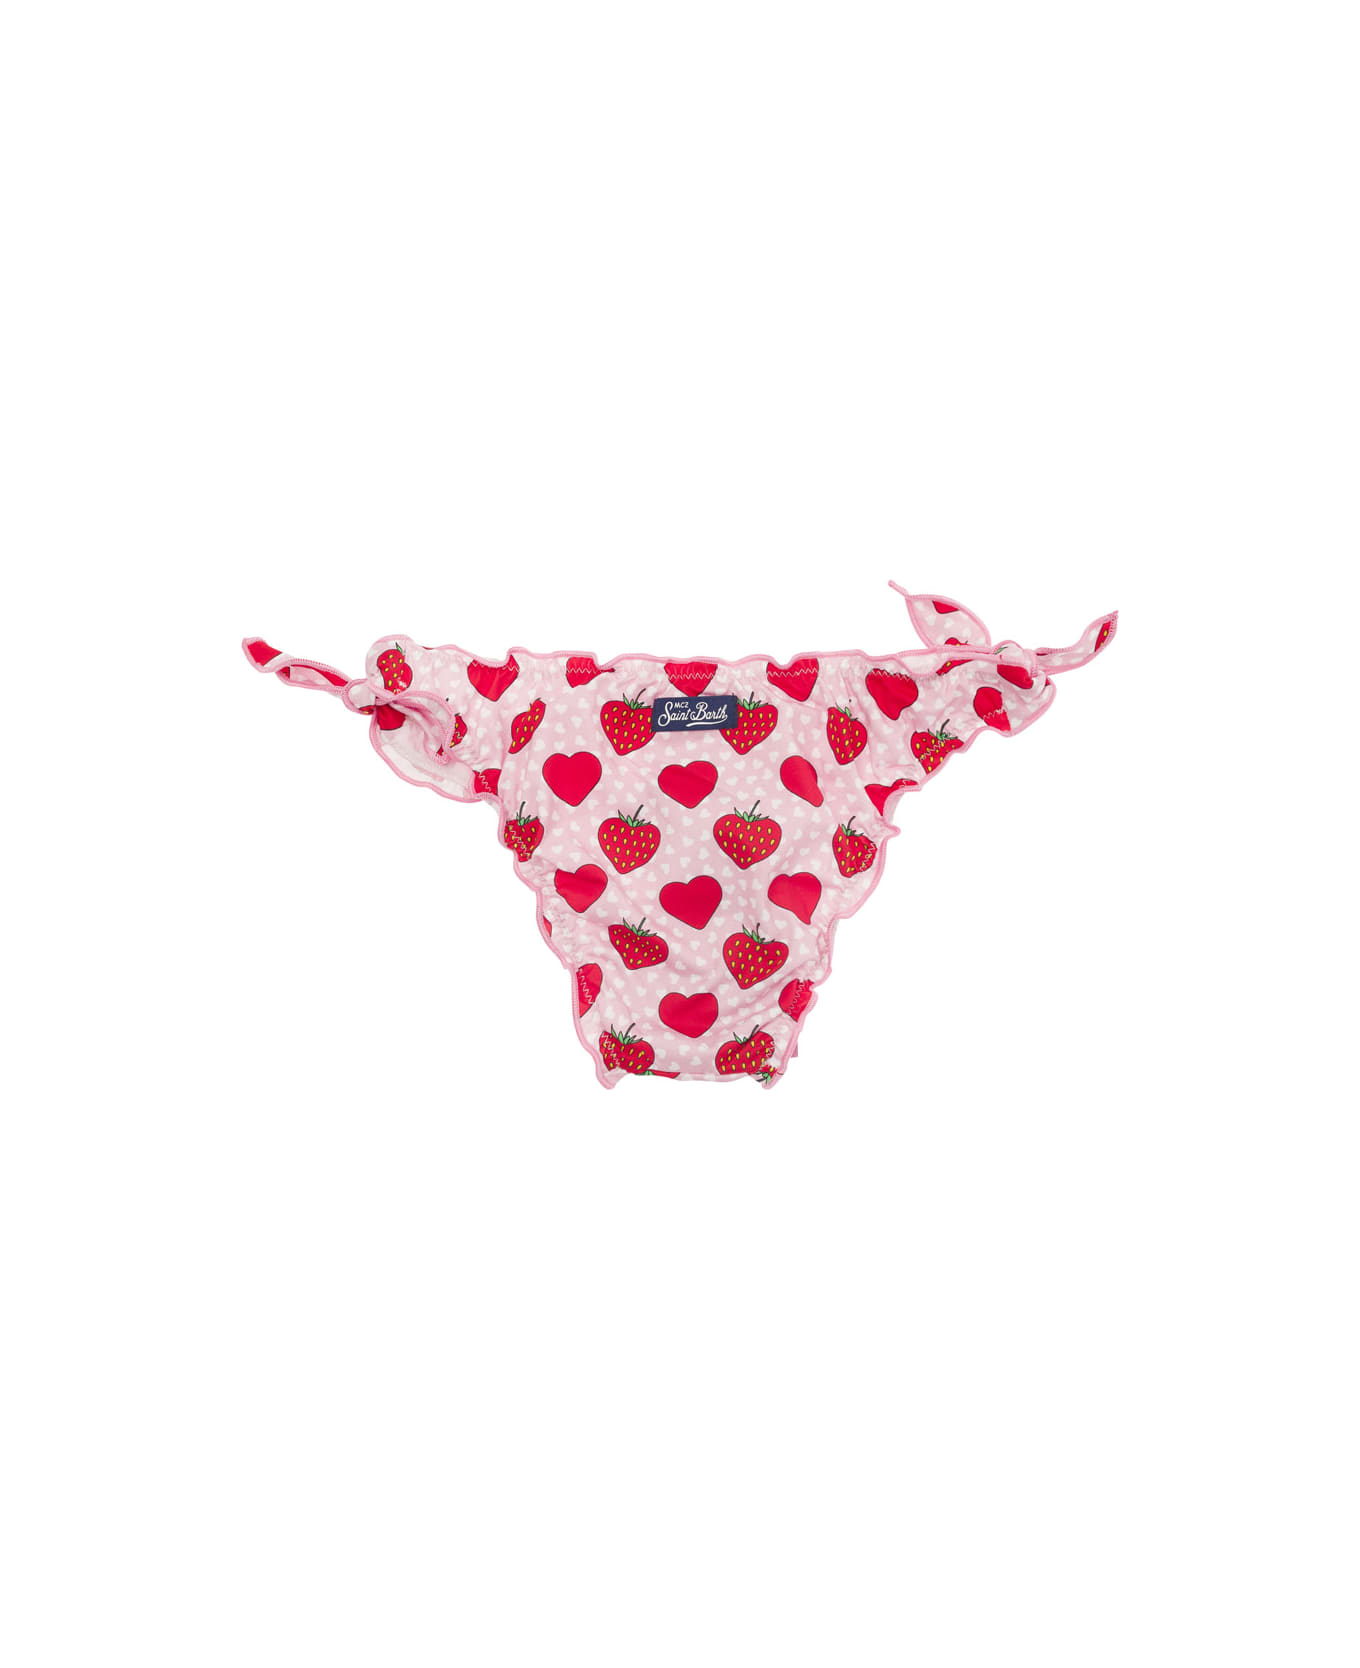 MC2 Saint Barth Pink And Red Bikini Bottom With Strawberry Print In Stretch Fabric Baby - Multicolor